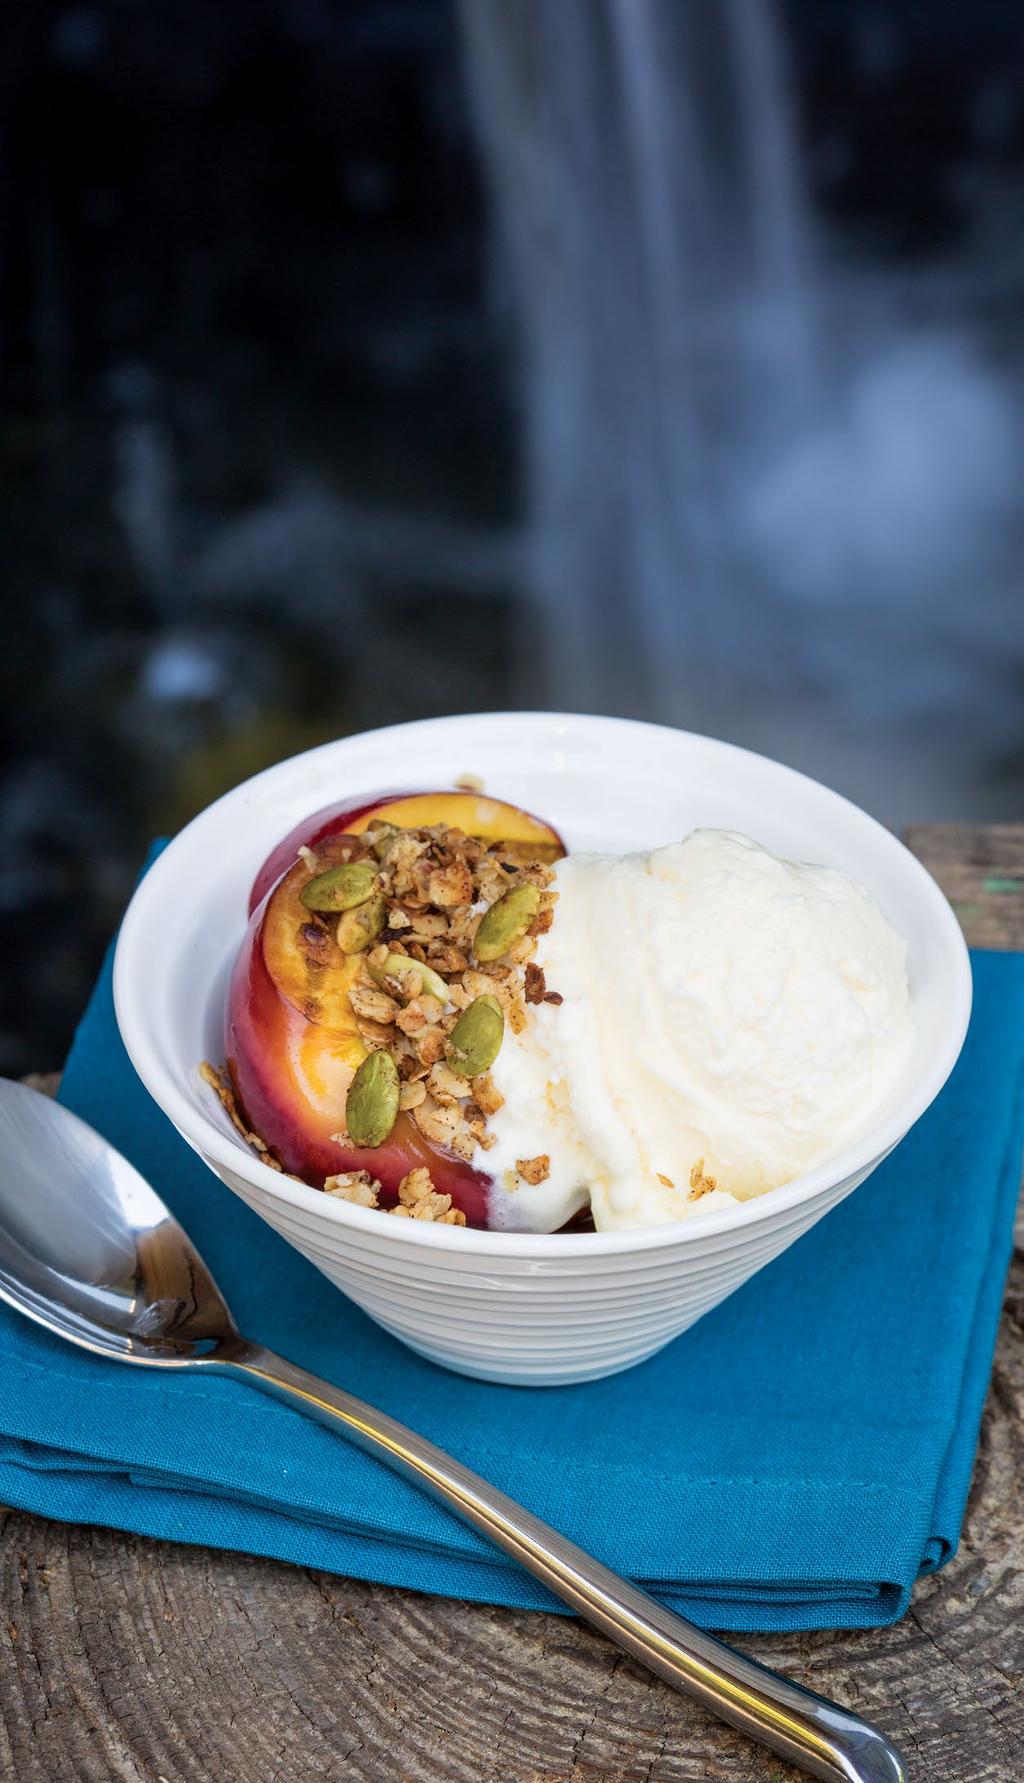 Grilled Plum Crisp Grilling fruits concentrates and caramelizes their natural sugars, making them sweeter. You can also use apricots, nectarines or peaches.